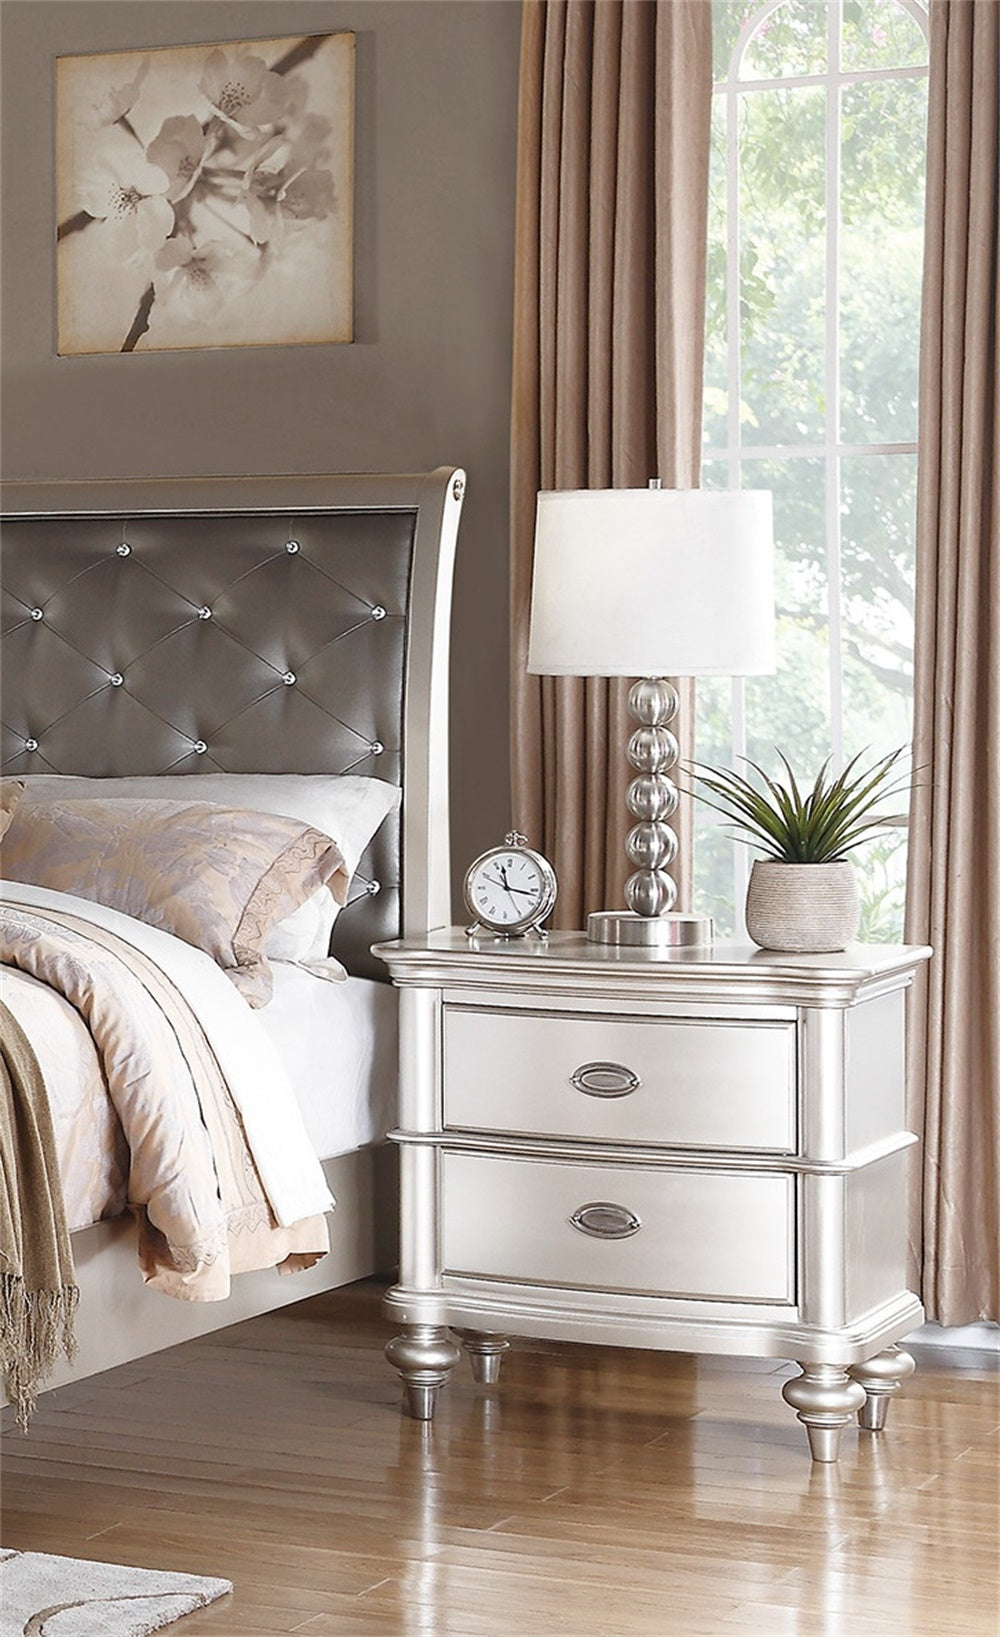 Wood Nightstand with 2 Drawer in Antique Silver